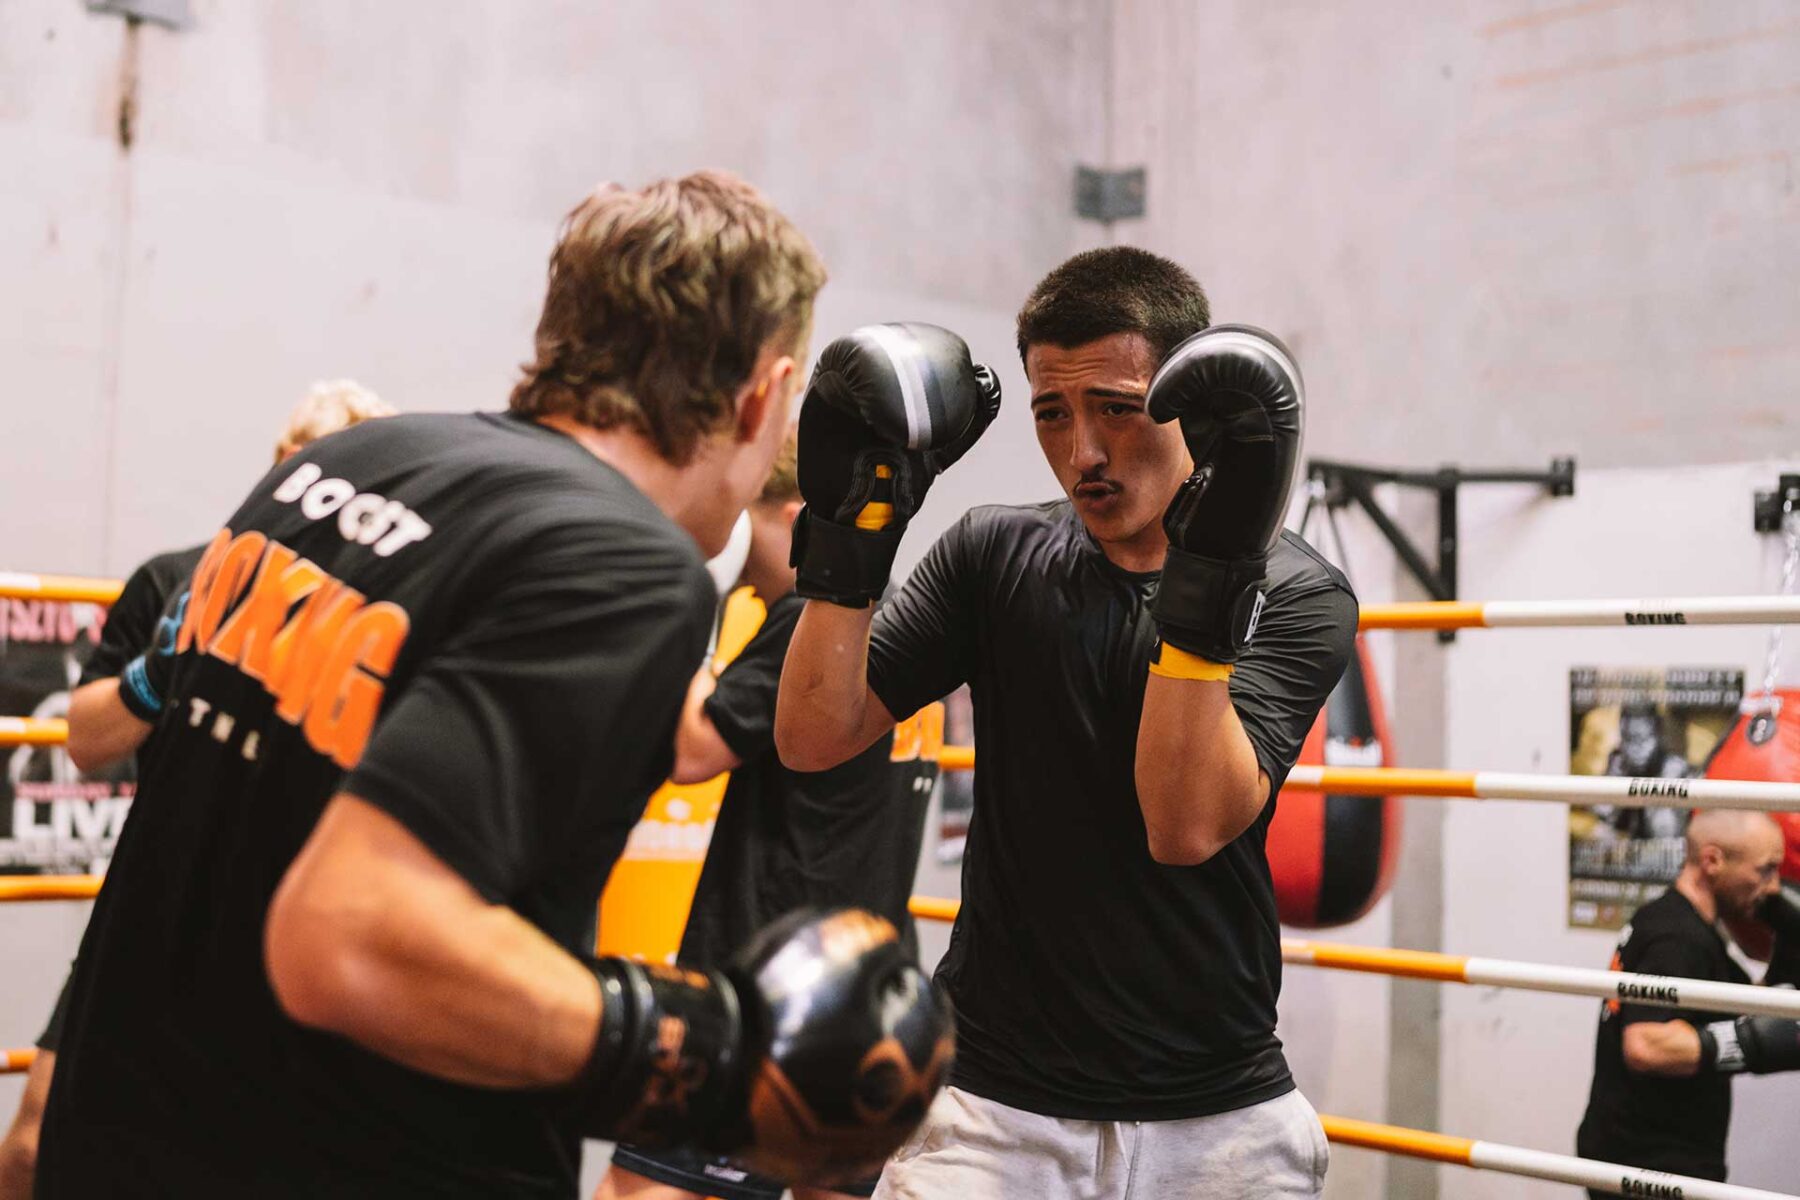 Two males boxing training in ring